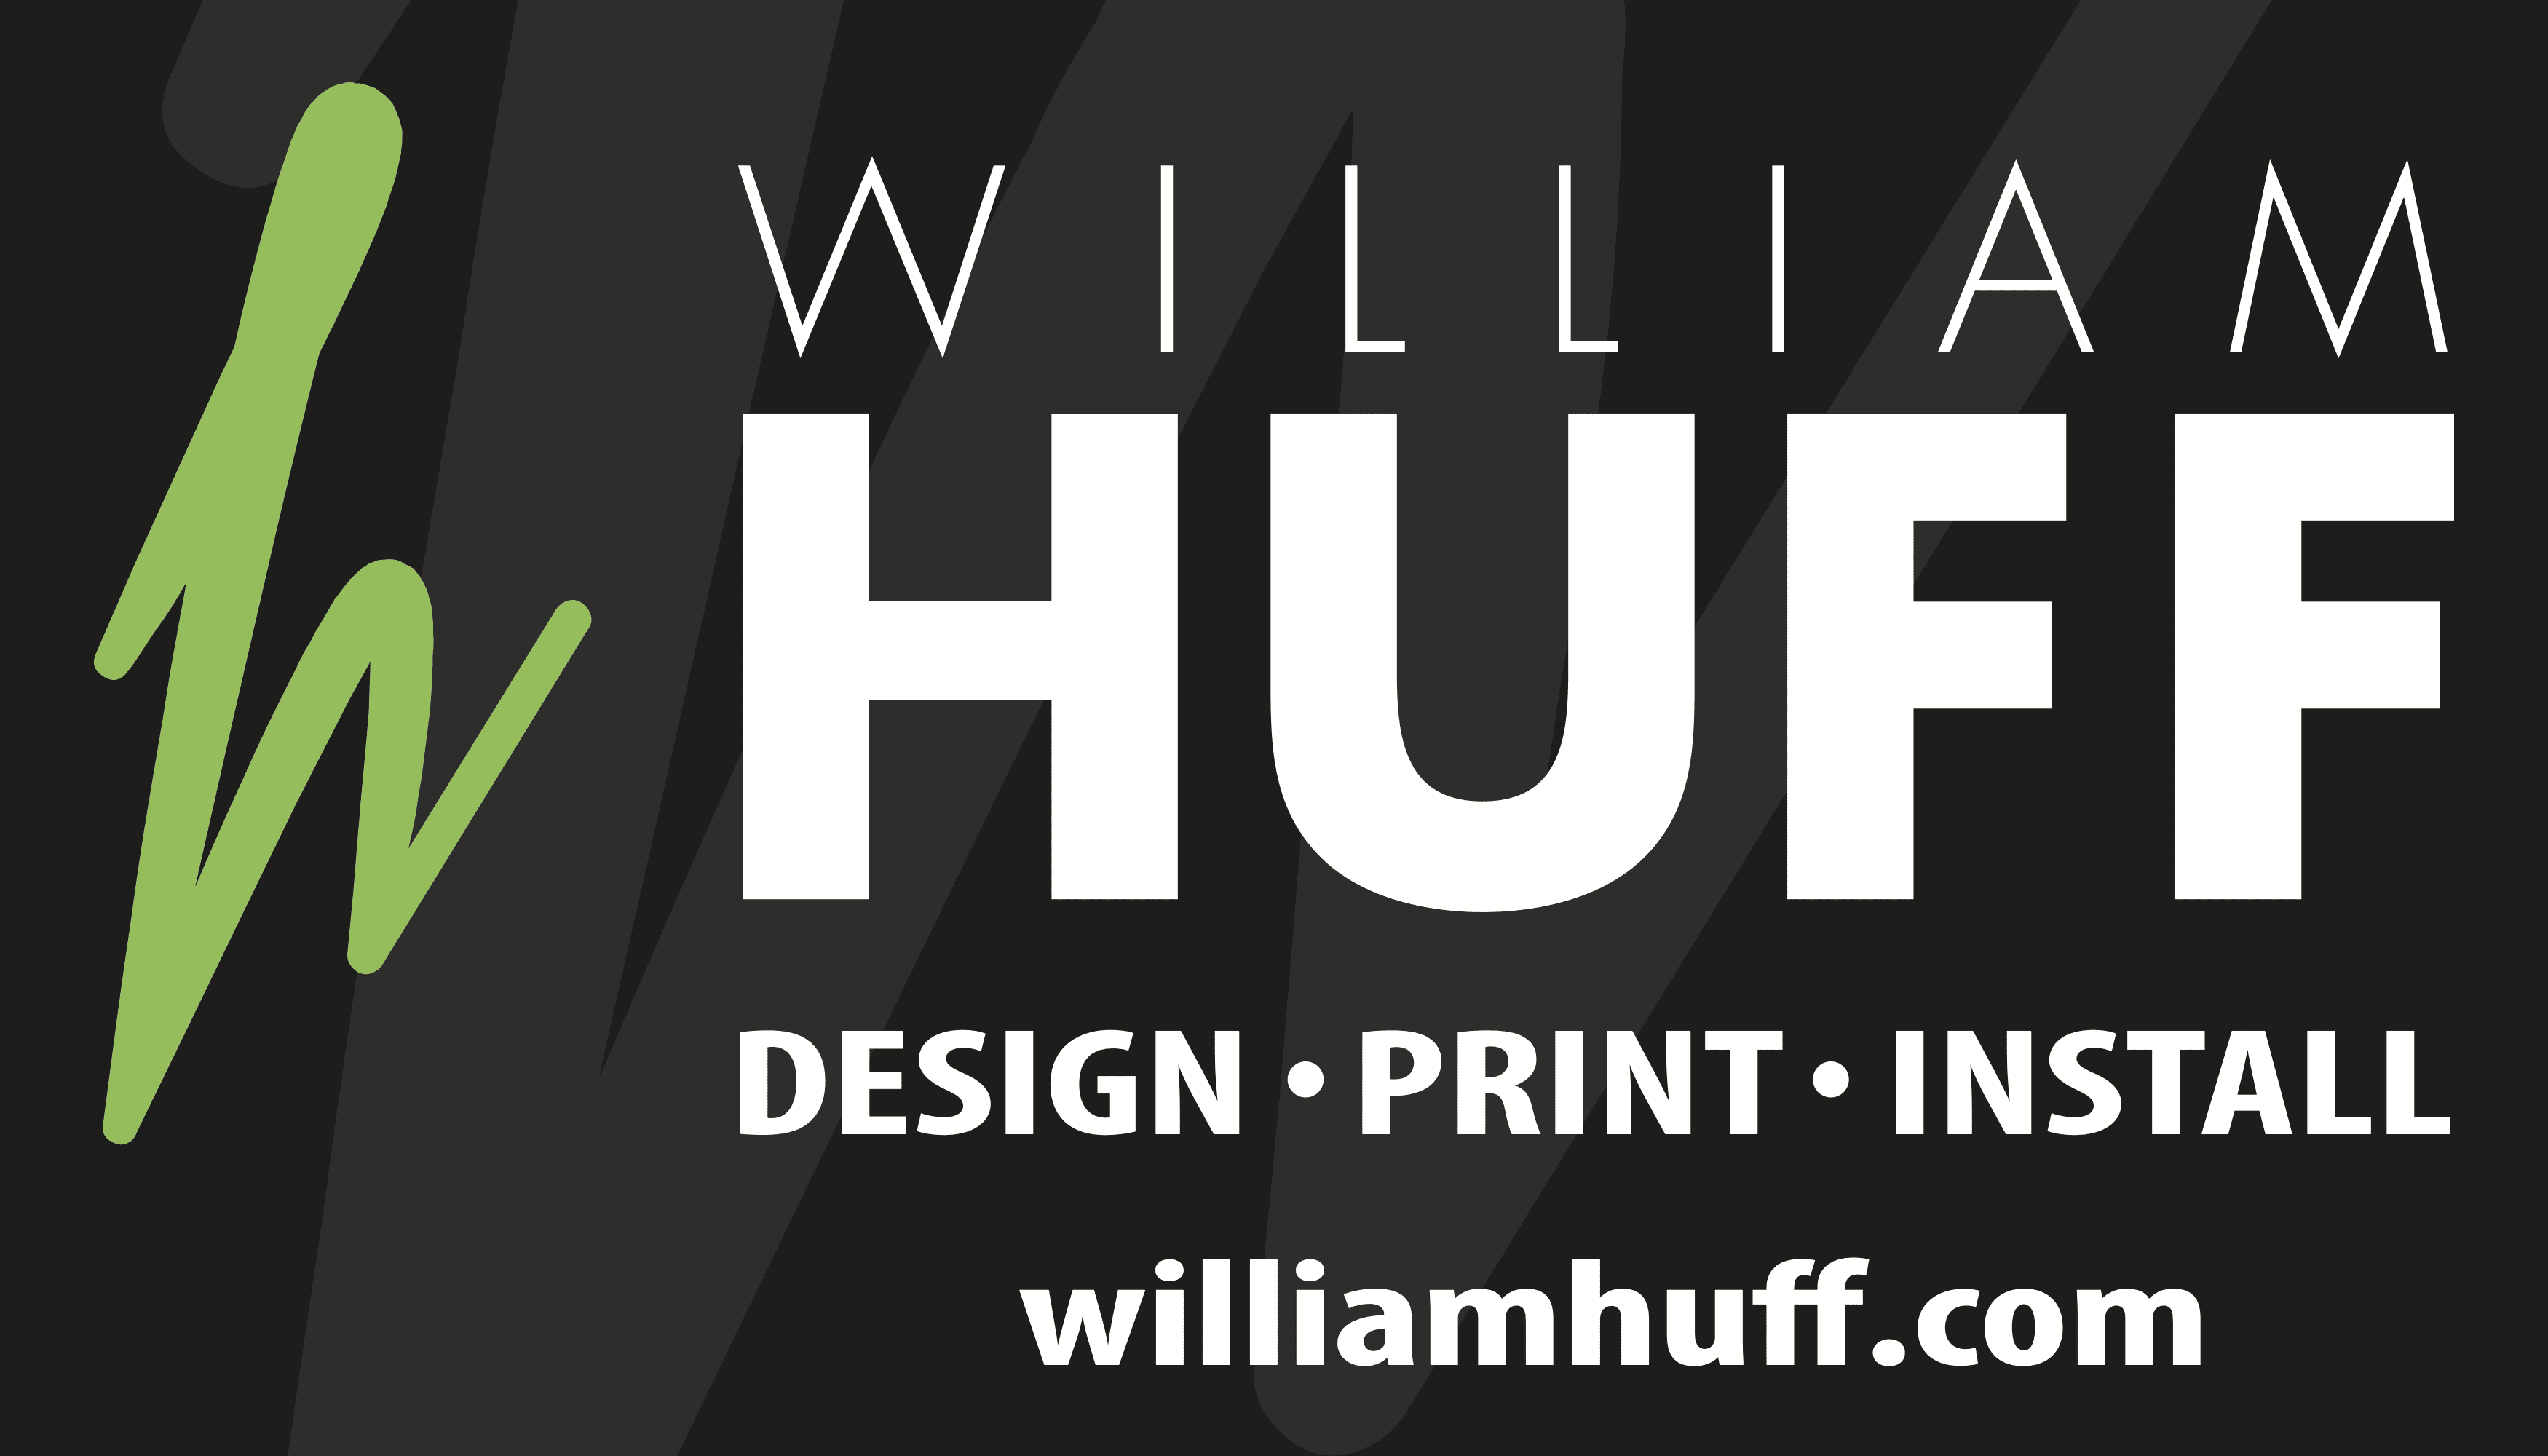 William Huff logo with tag copy (1)